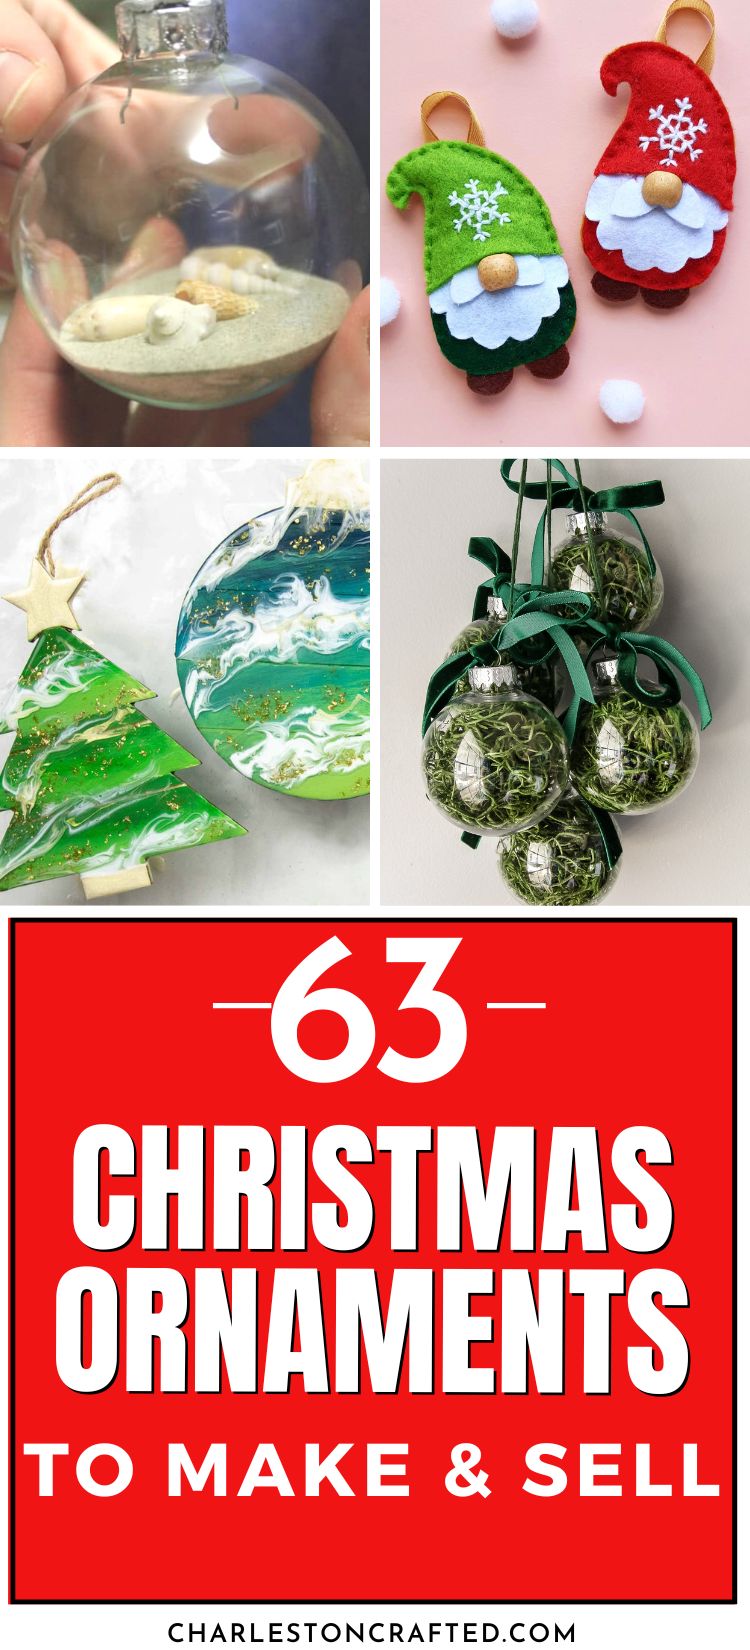 How to Paint Plastic Ornaments with a Floral Pattern 